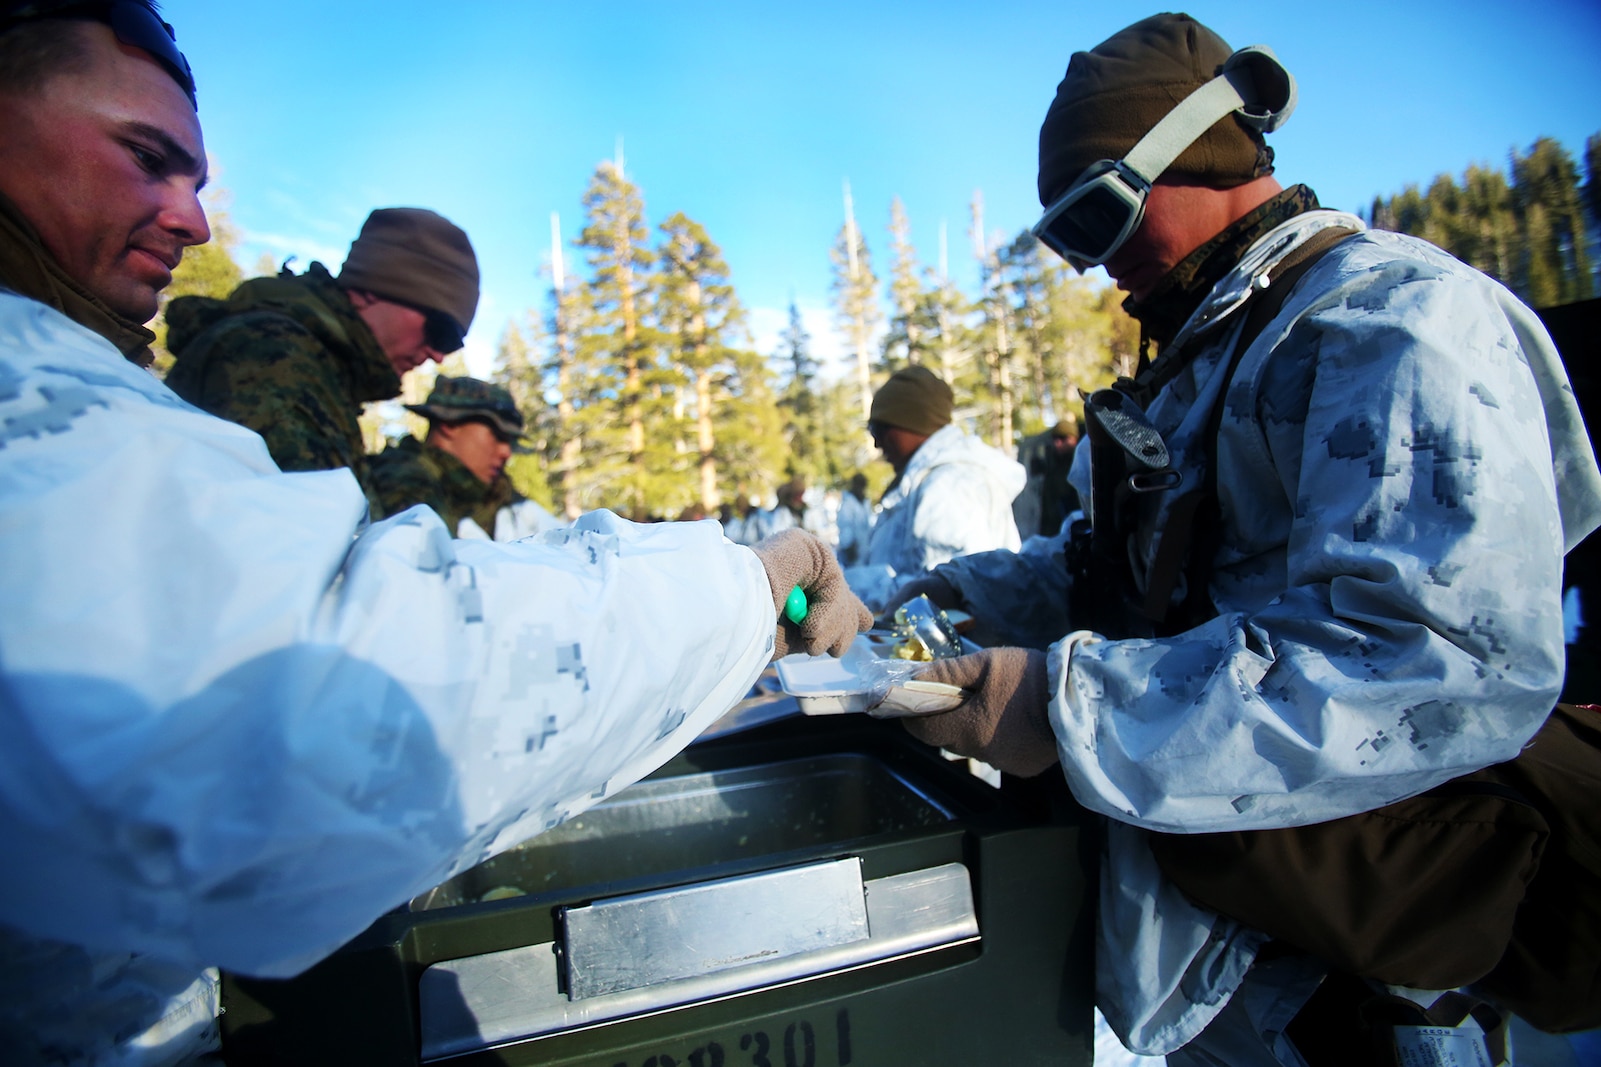 Marines are served warm food during a cold weather training exercise at the Mountain Warfare Training Center in Bridgeport, Calif., March 16, 2016. The Marines, combat engineers with 7th Engineer Support Battalion, 1st Marine Logistics Group, were among 90 Marines with 7th ESB who served as the logistics combat element in support of 2nd Battalion, 4th Marine Regiment, 1st Marine Division, during Mountain Exercise 6-16, Feb. 24- March 26, 2016. The Battalion integrated 18 combat engineers with the infantrymen conducting the exercise (U.S. Marine Corps photo by Sgt. Laura Gauna/released)